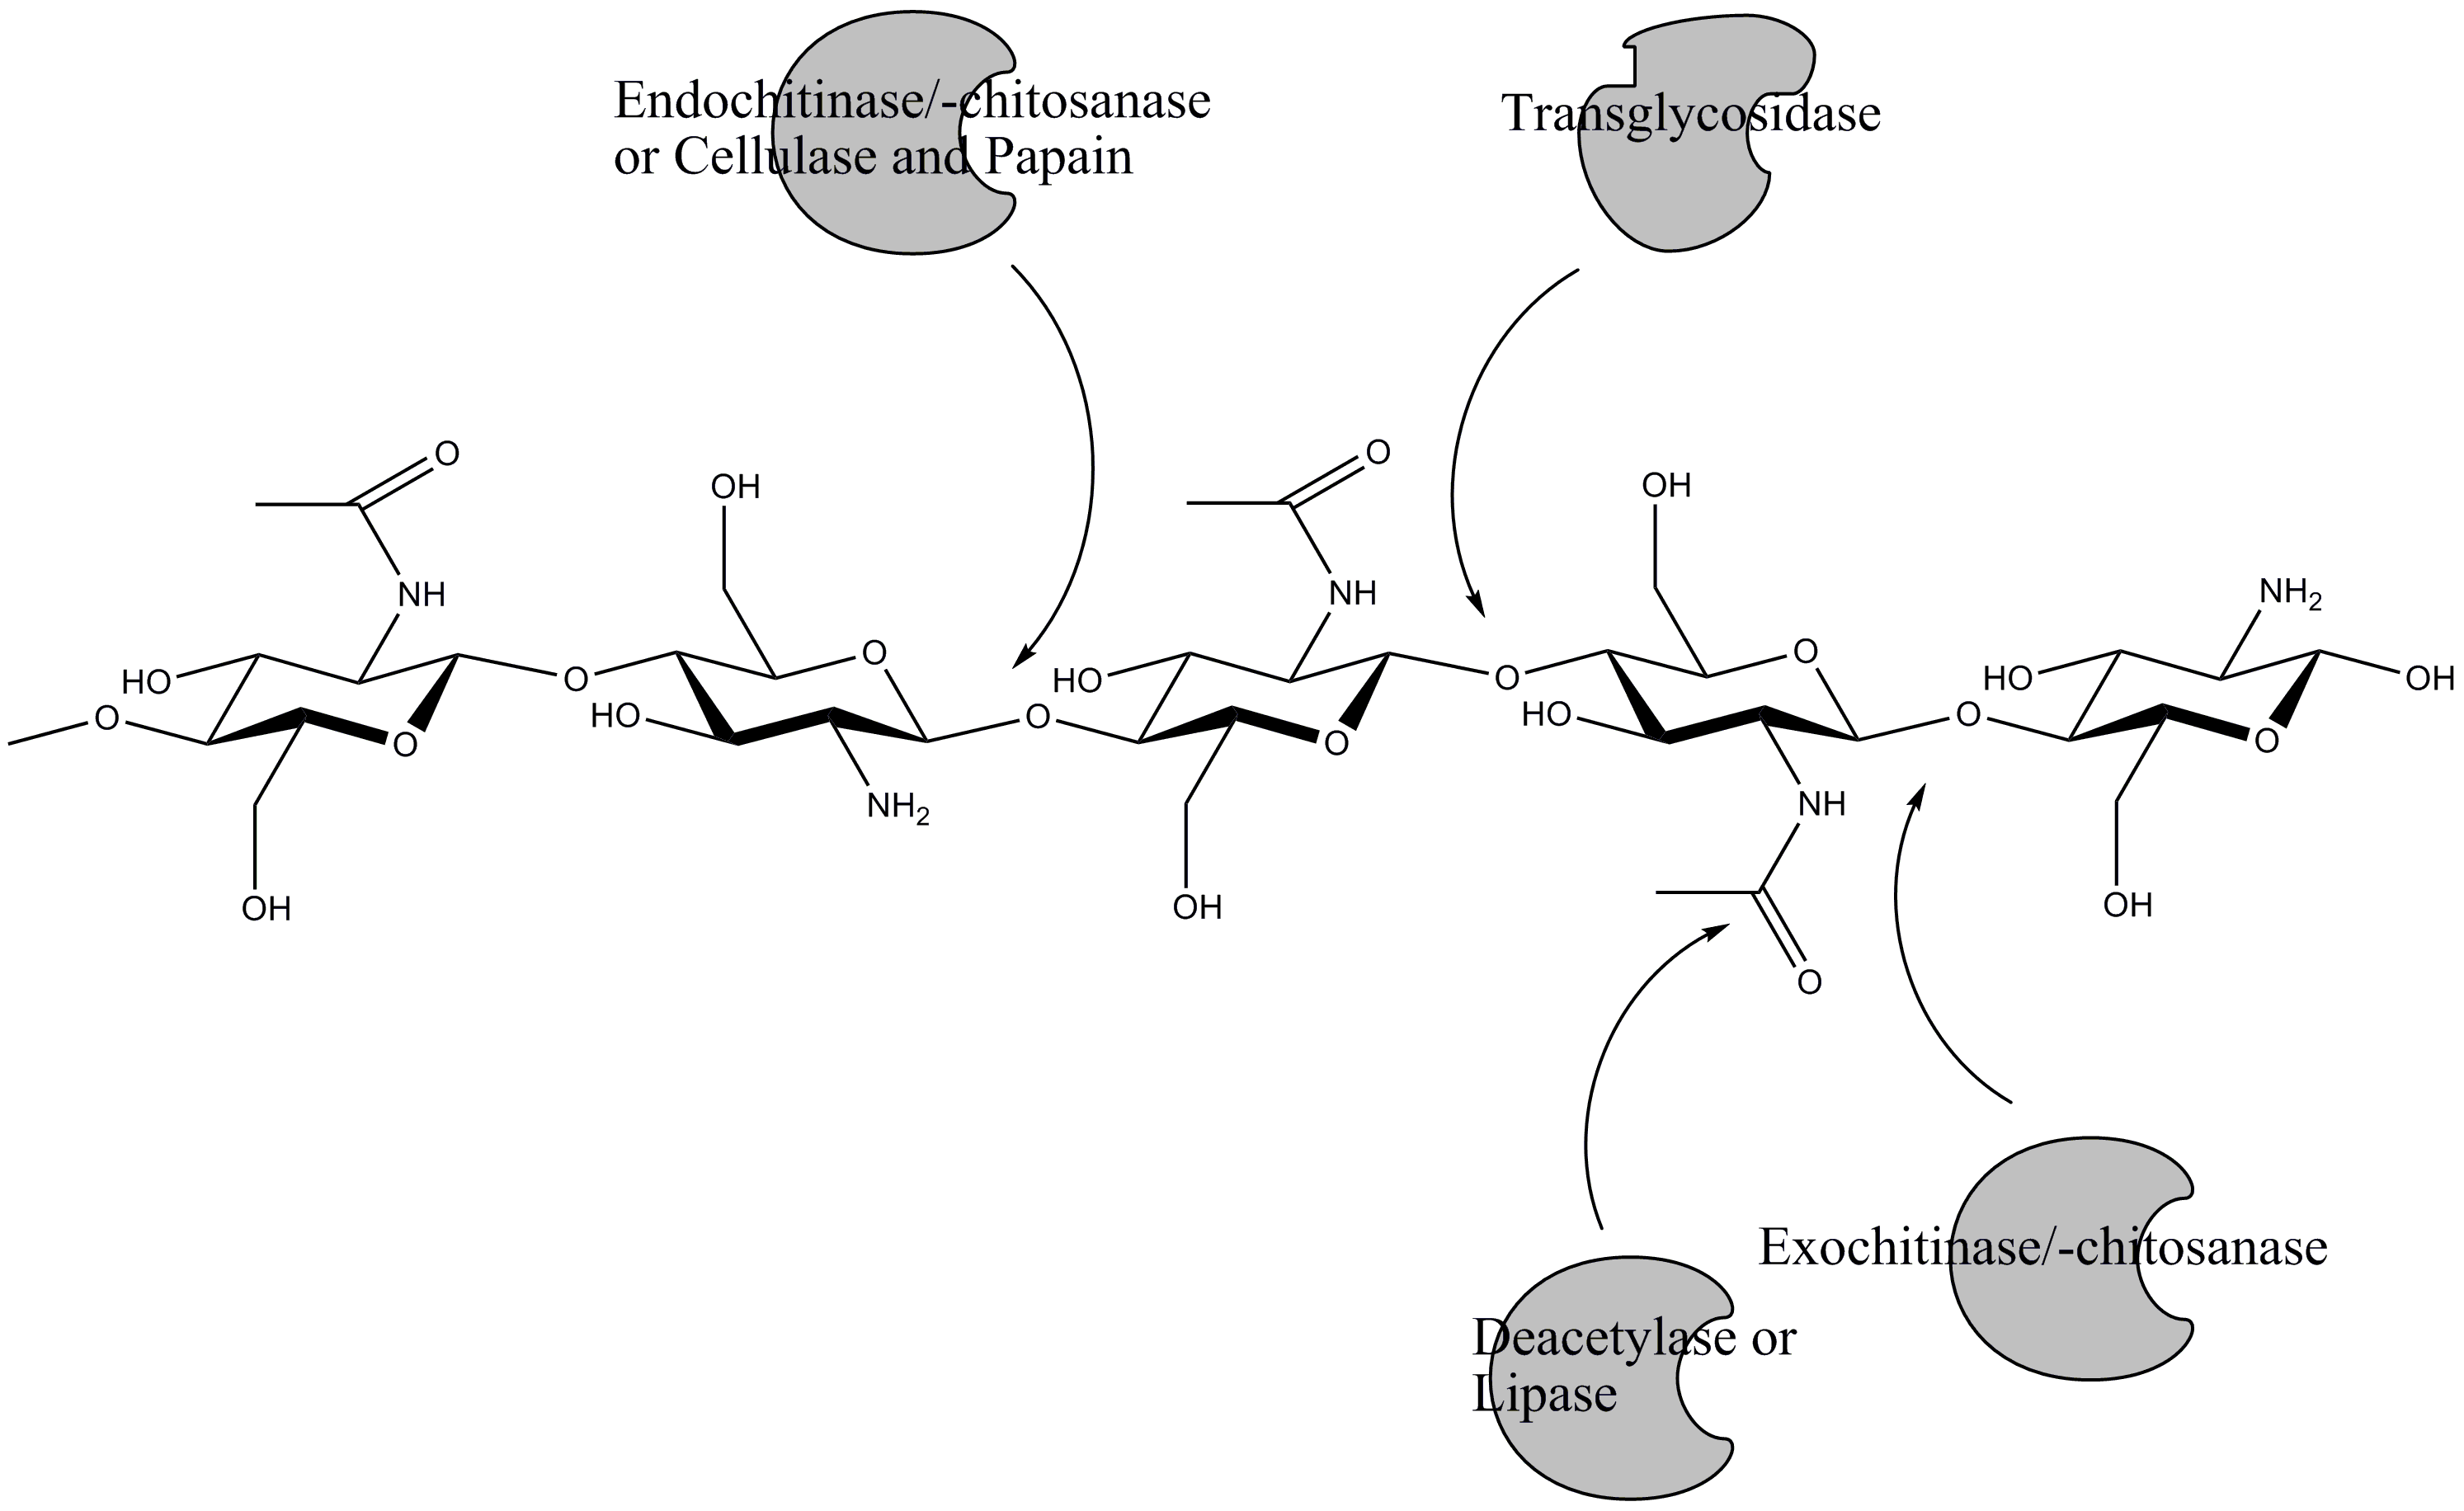 Enzymatic conversion of chitin.